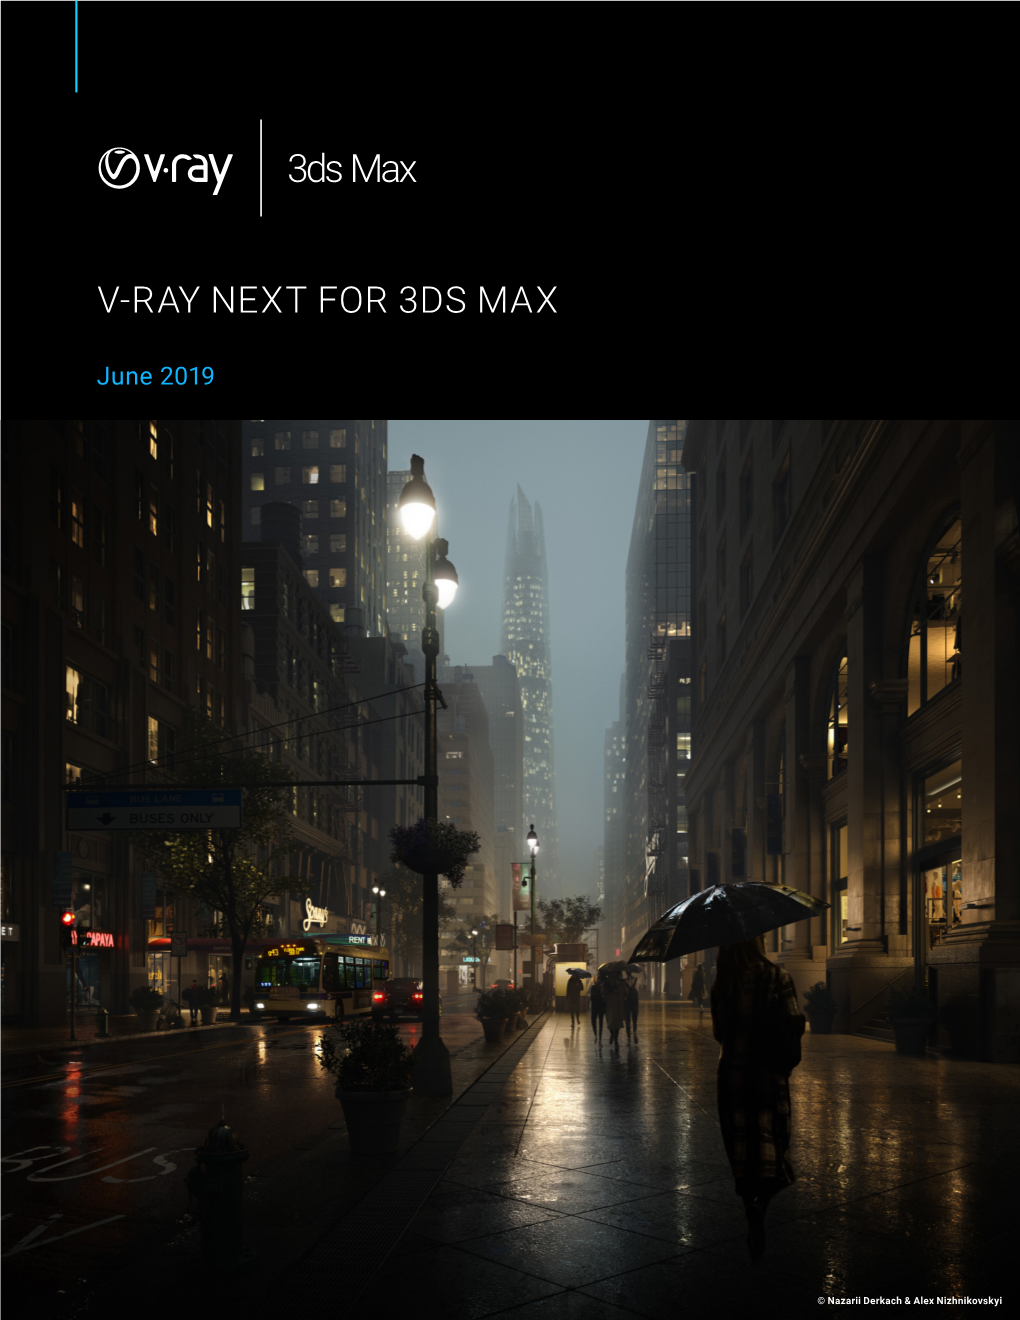 V-Ray Next for 3Ds Max